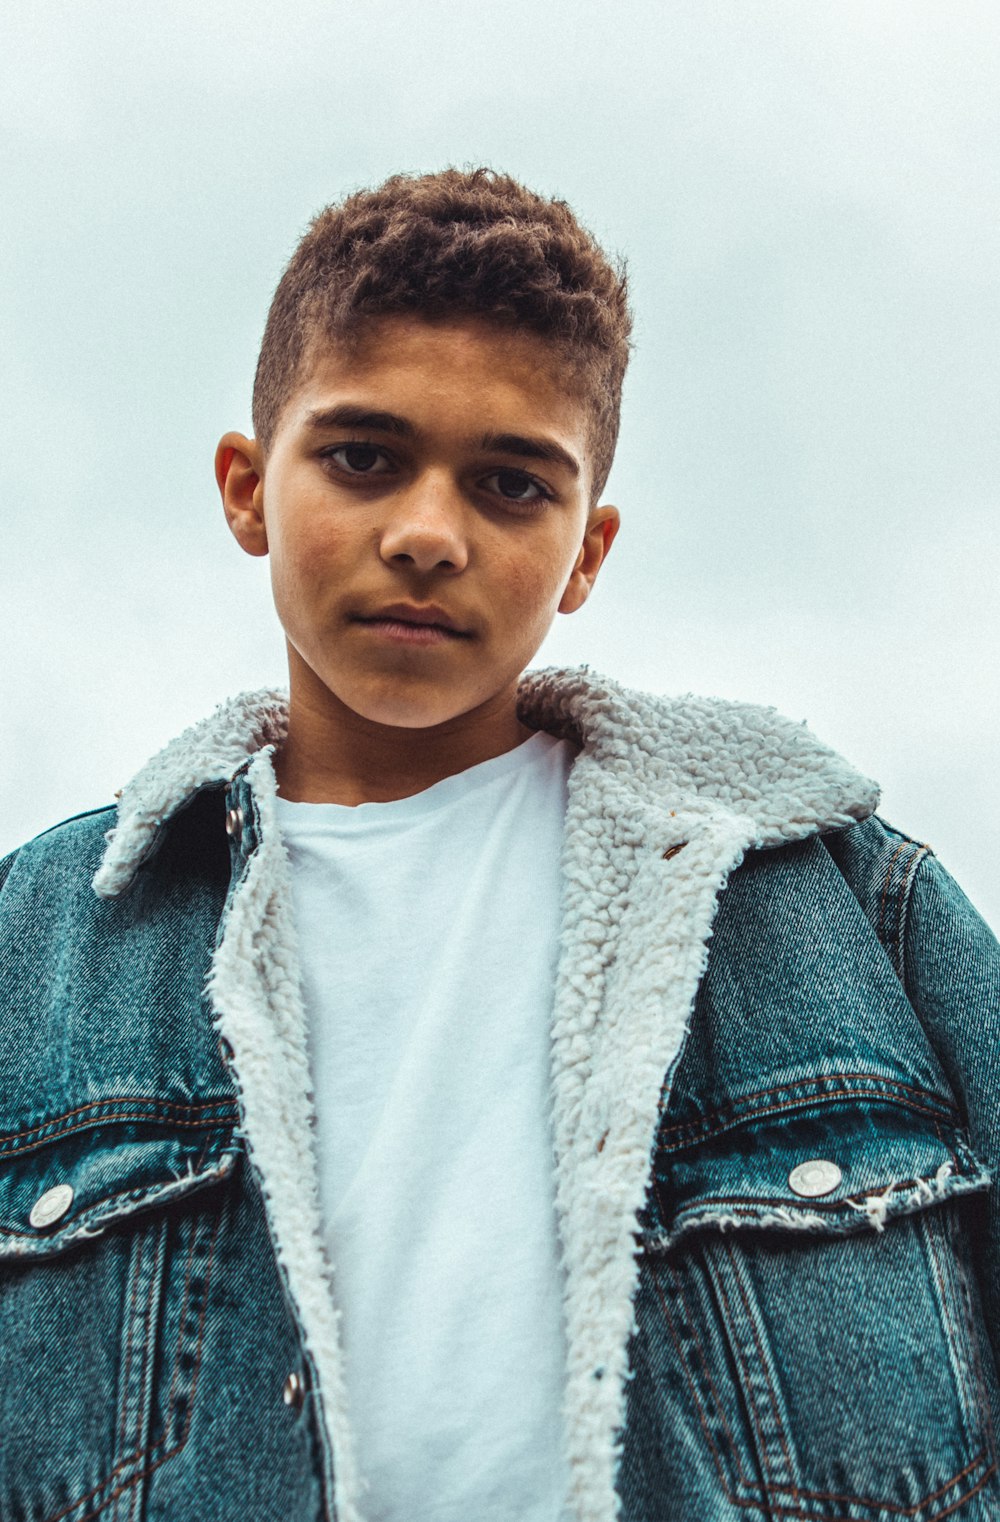 boy wearing blue denim jacket standing and looking straight